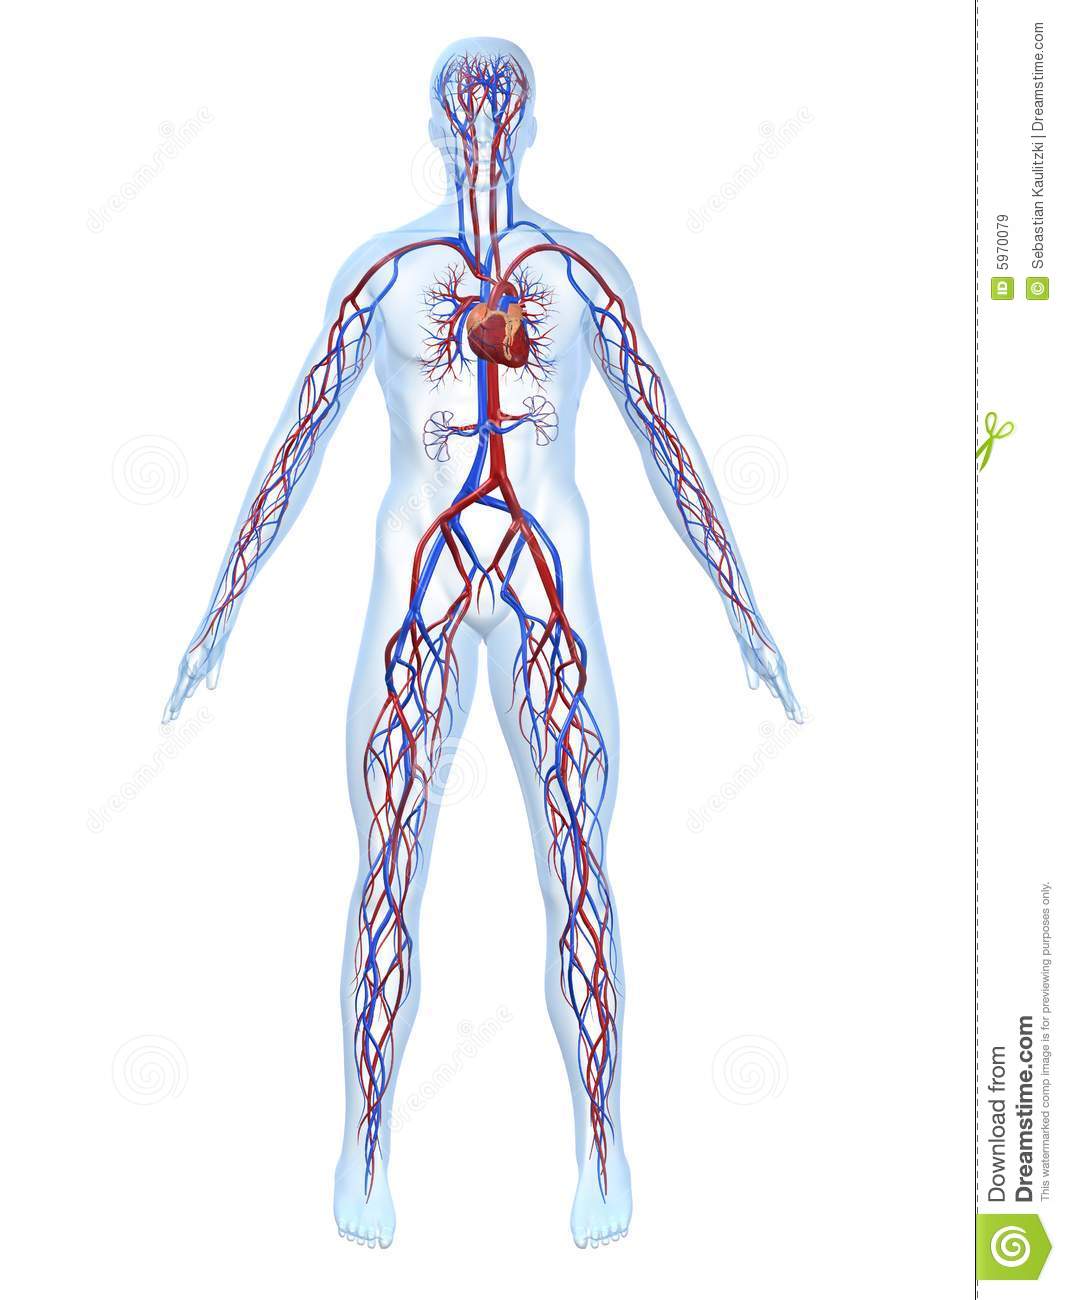 Cardiovascular System Royalty Free Stock Images   Image  5970079